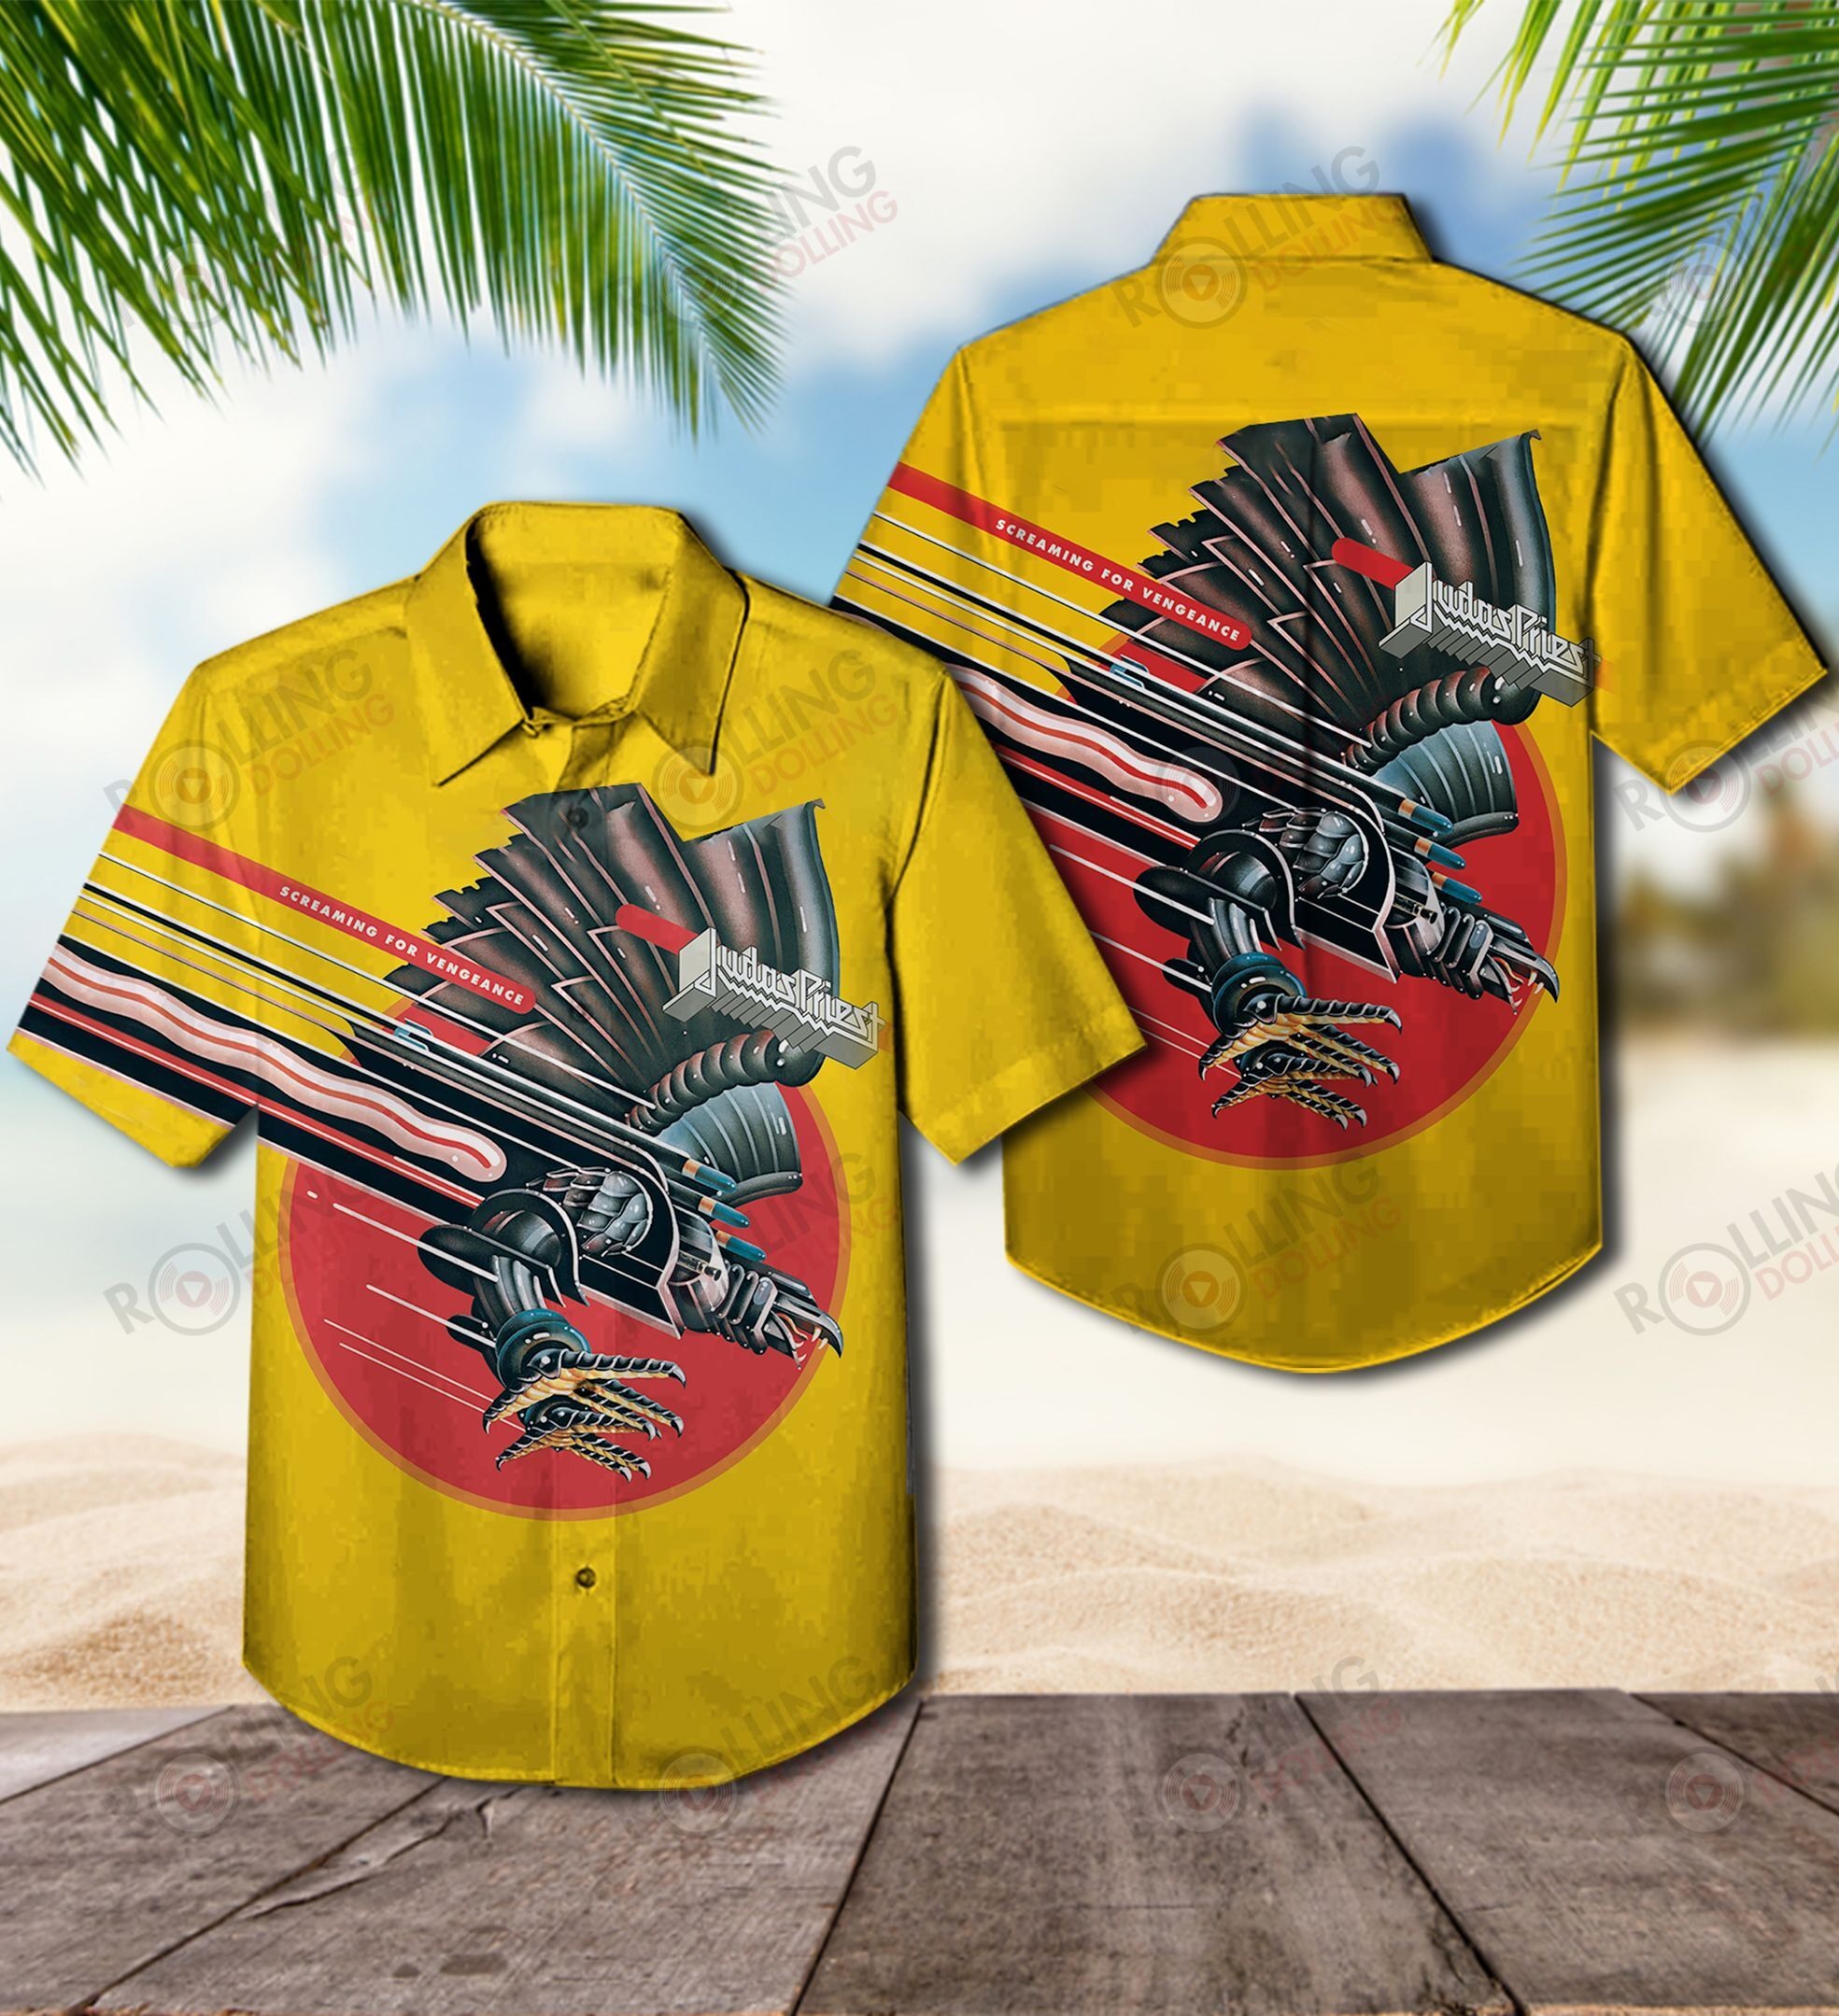 This would make a great gift for any fan who loves Hawaiian Shirt as well as Rock band 114